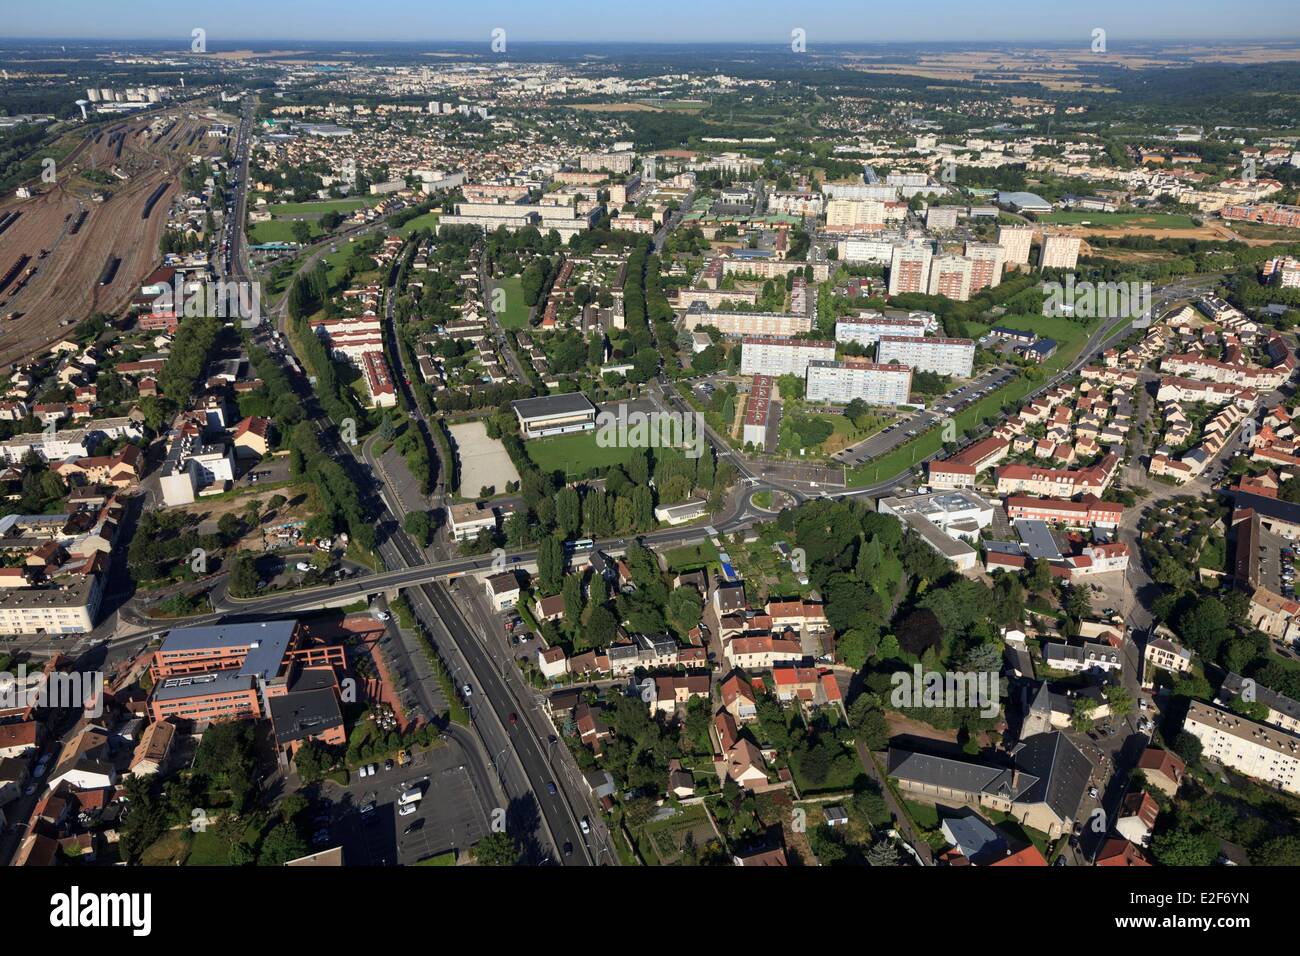 France Yvelines Trappes En Yvelines City Hall Aerial View Stock Photo Alamy